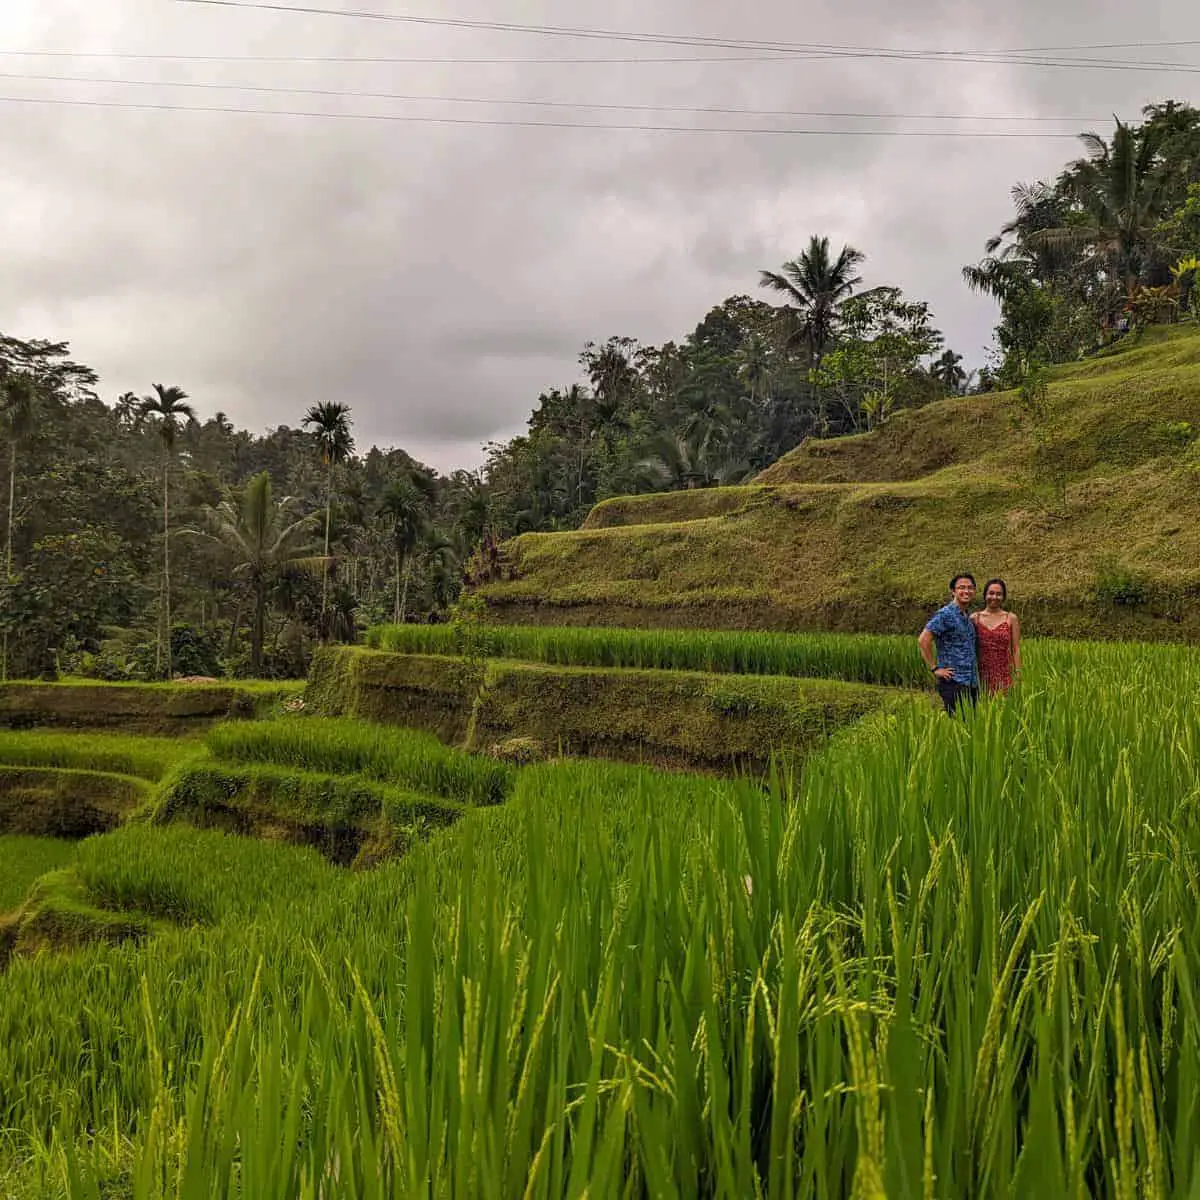 Tegallalang rice fields in Ubud Bali